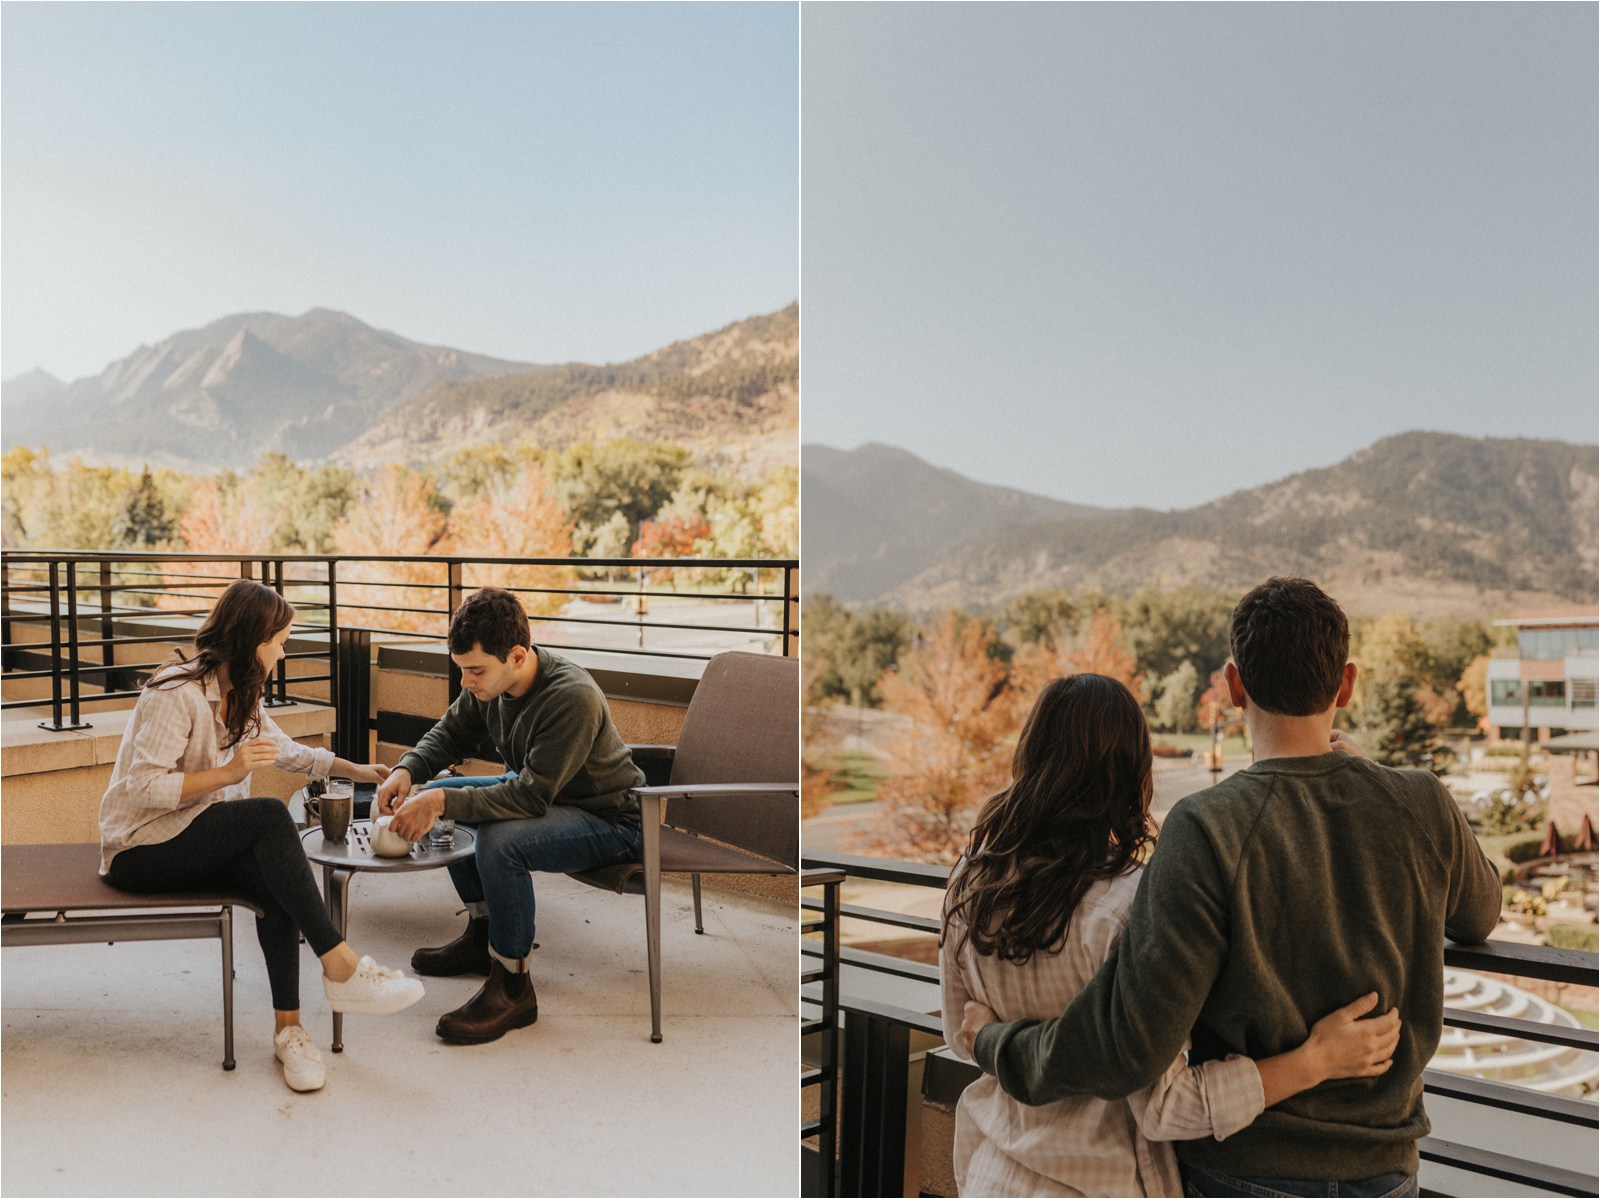 The elopement couple start their morning on their hotel balcony, drinking tea and eating breakfast together while admiring the Colorado mountains in the distance.